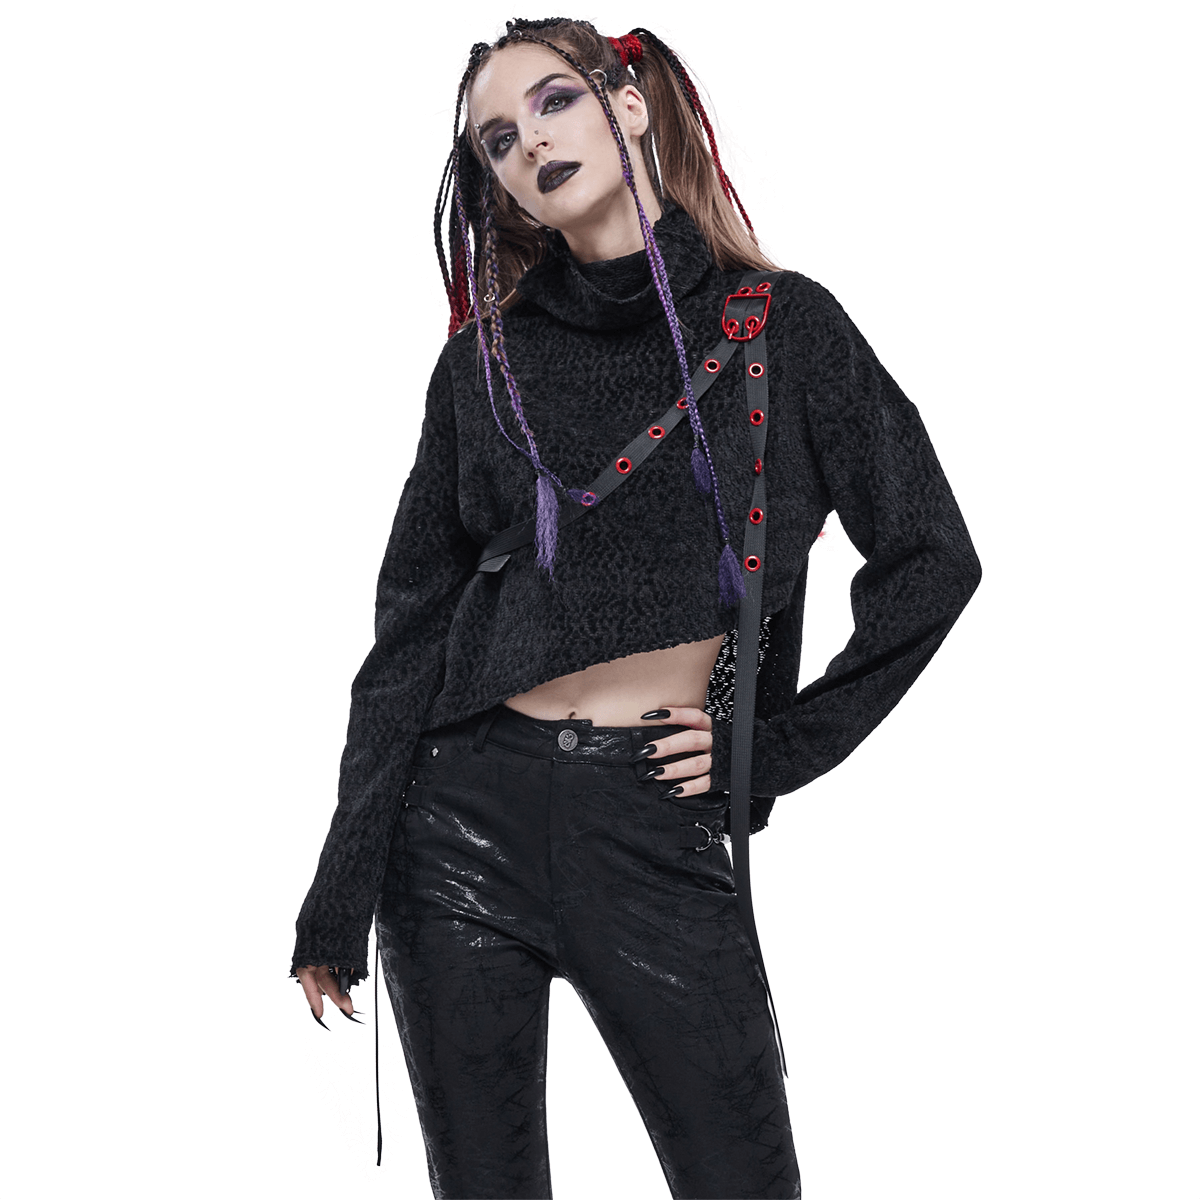 Women's Gothic Punk High Stand-Up Collar Short Sweater / Stylish Black Sweater With Belt & Buckle - HARD'N'HEAVY